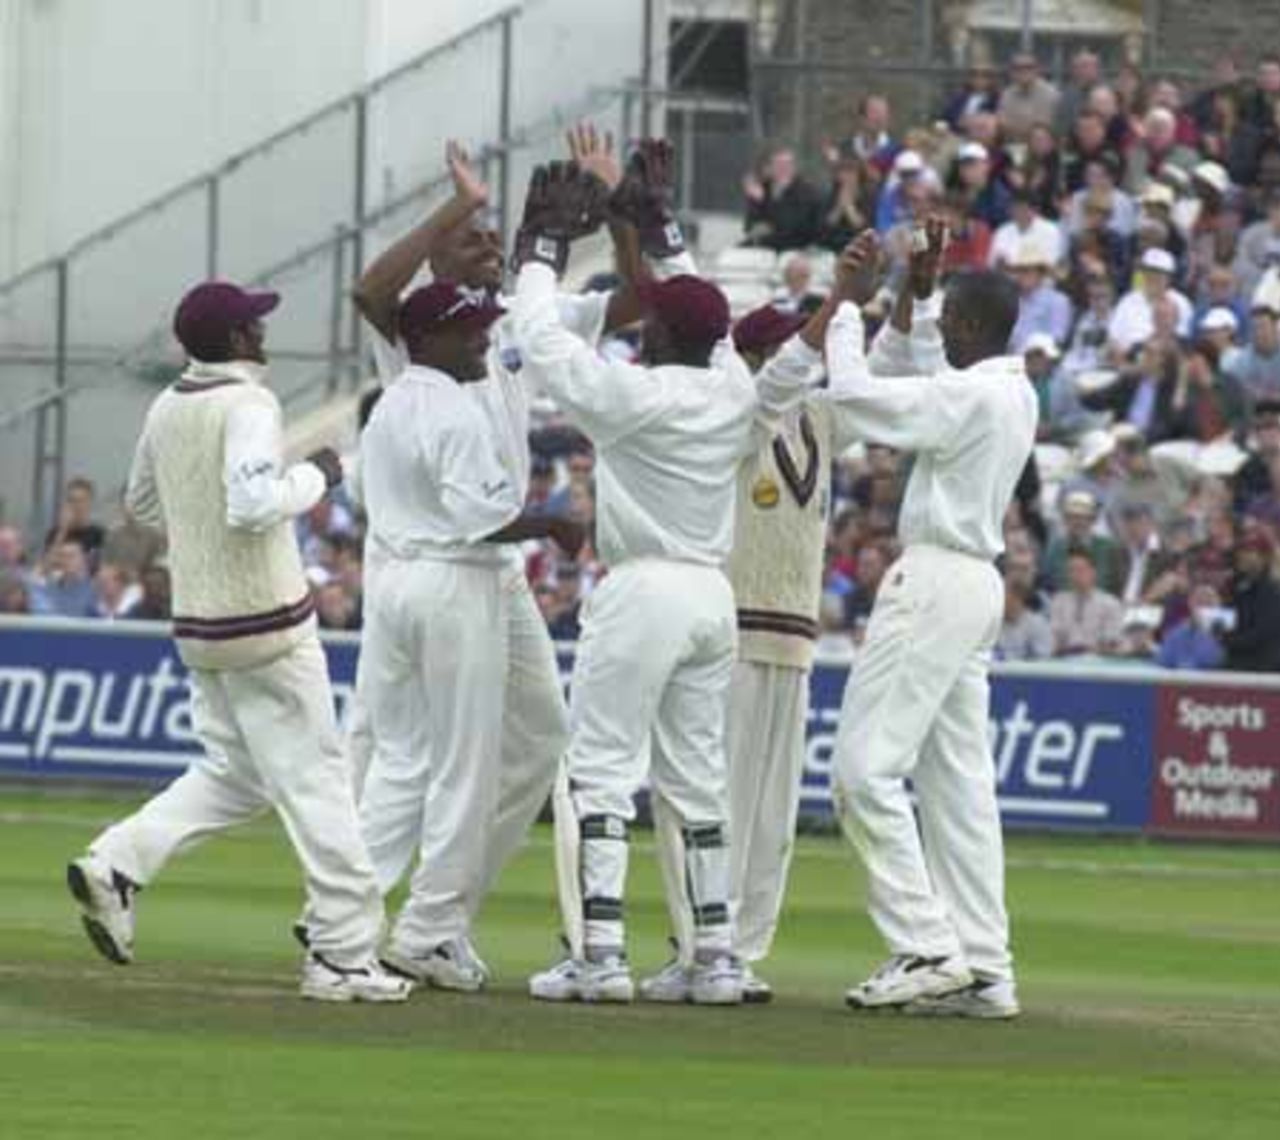 On the 4th day of the Cornhill Insurance Test Match at The Oval 2000